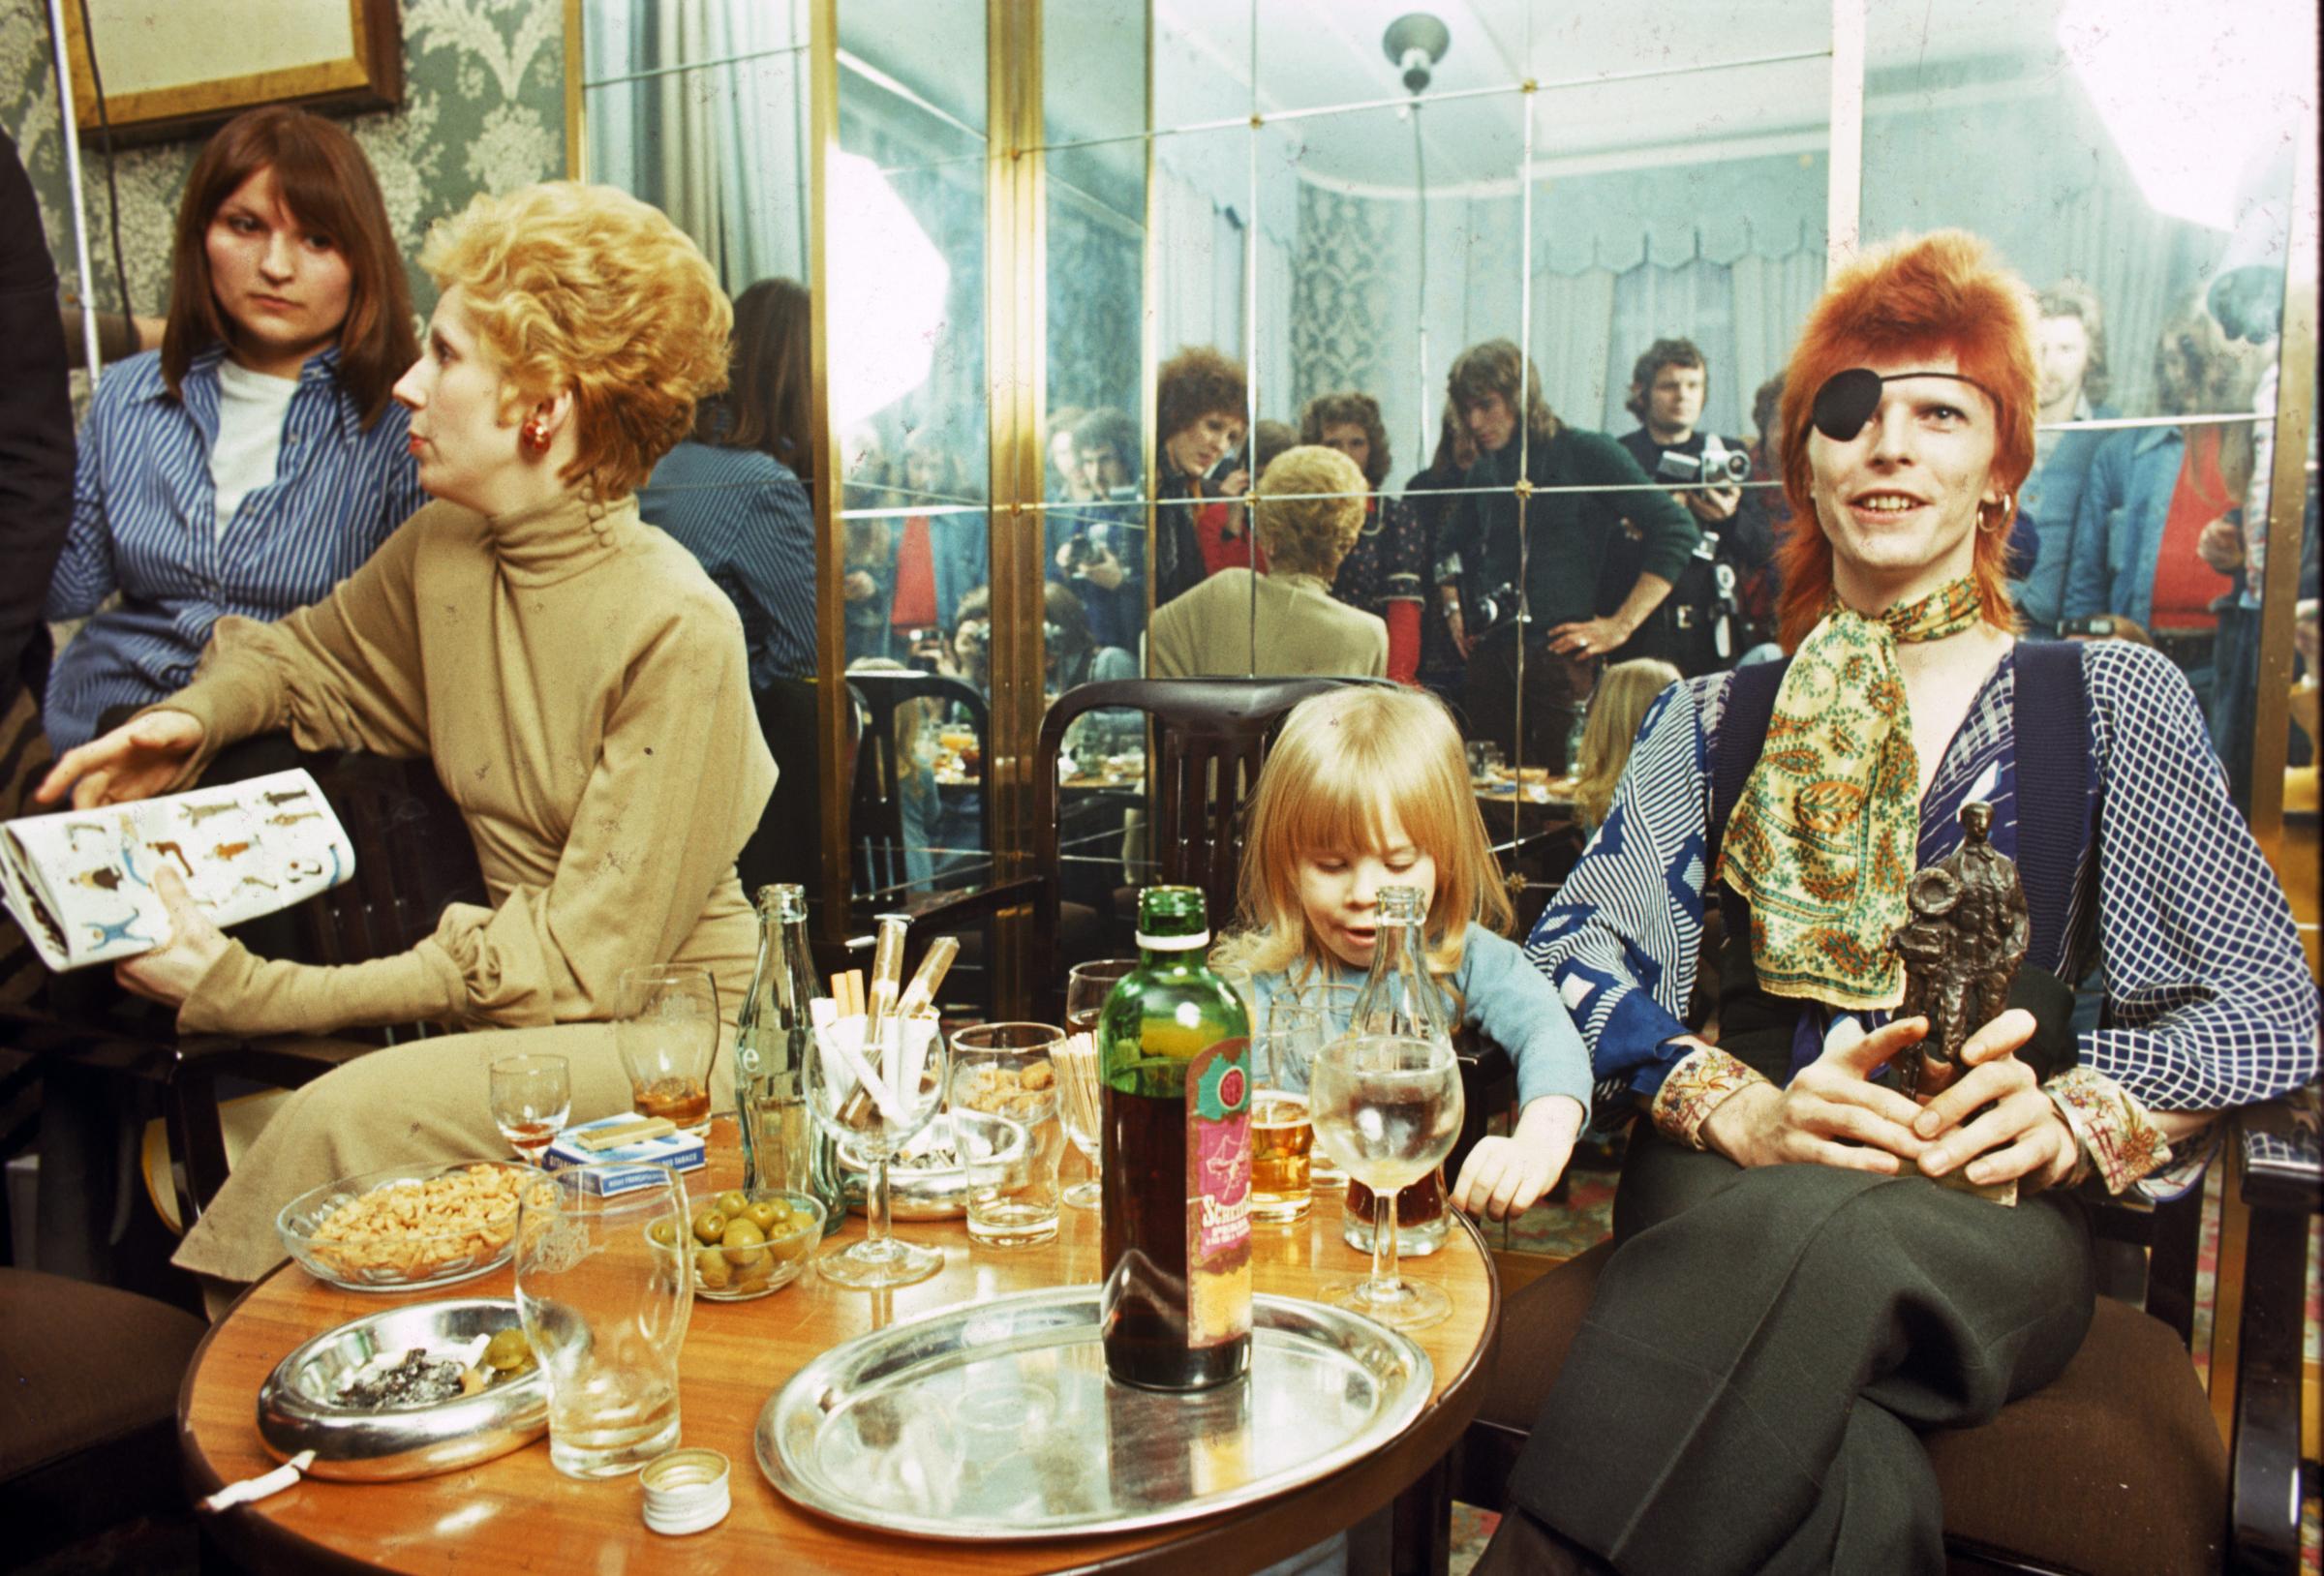 From left: Angie Bowie, his son Zowie Bowie (Duncan Jones) and David Bowie, appear at a press conference at the Amstel Hotel on Feb. 7, 1974 in Amsterdam, Netherlands.